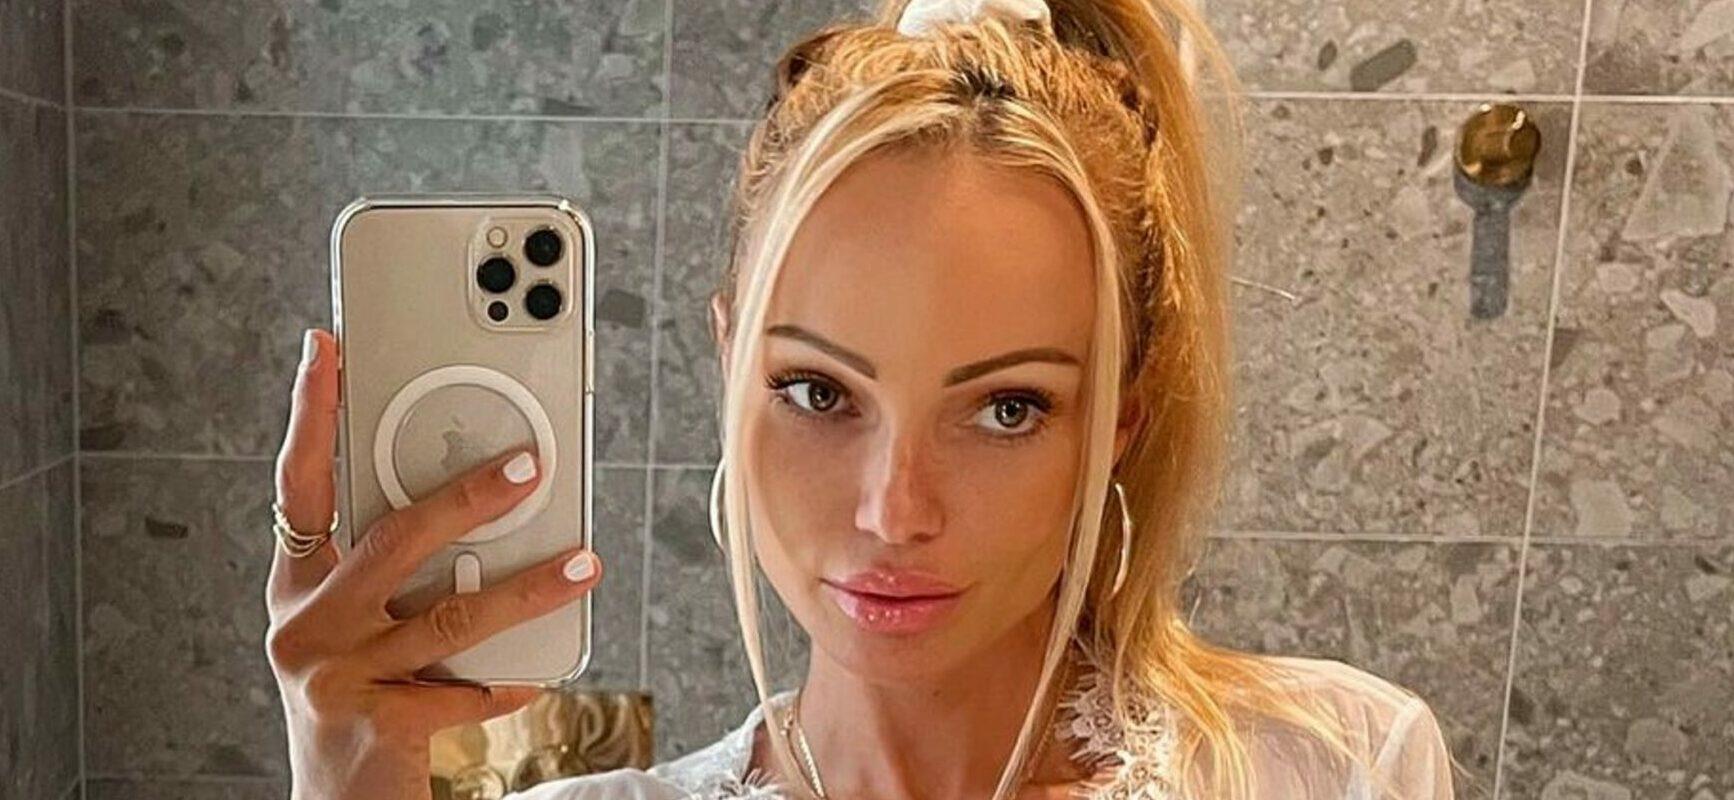 Abby Dowse taking a selfie.